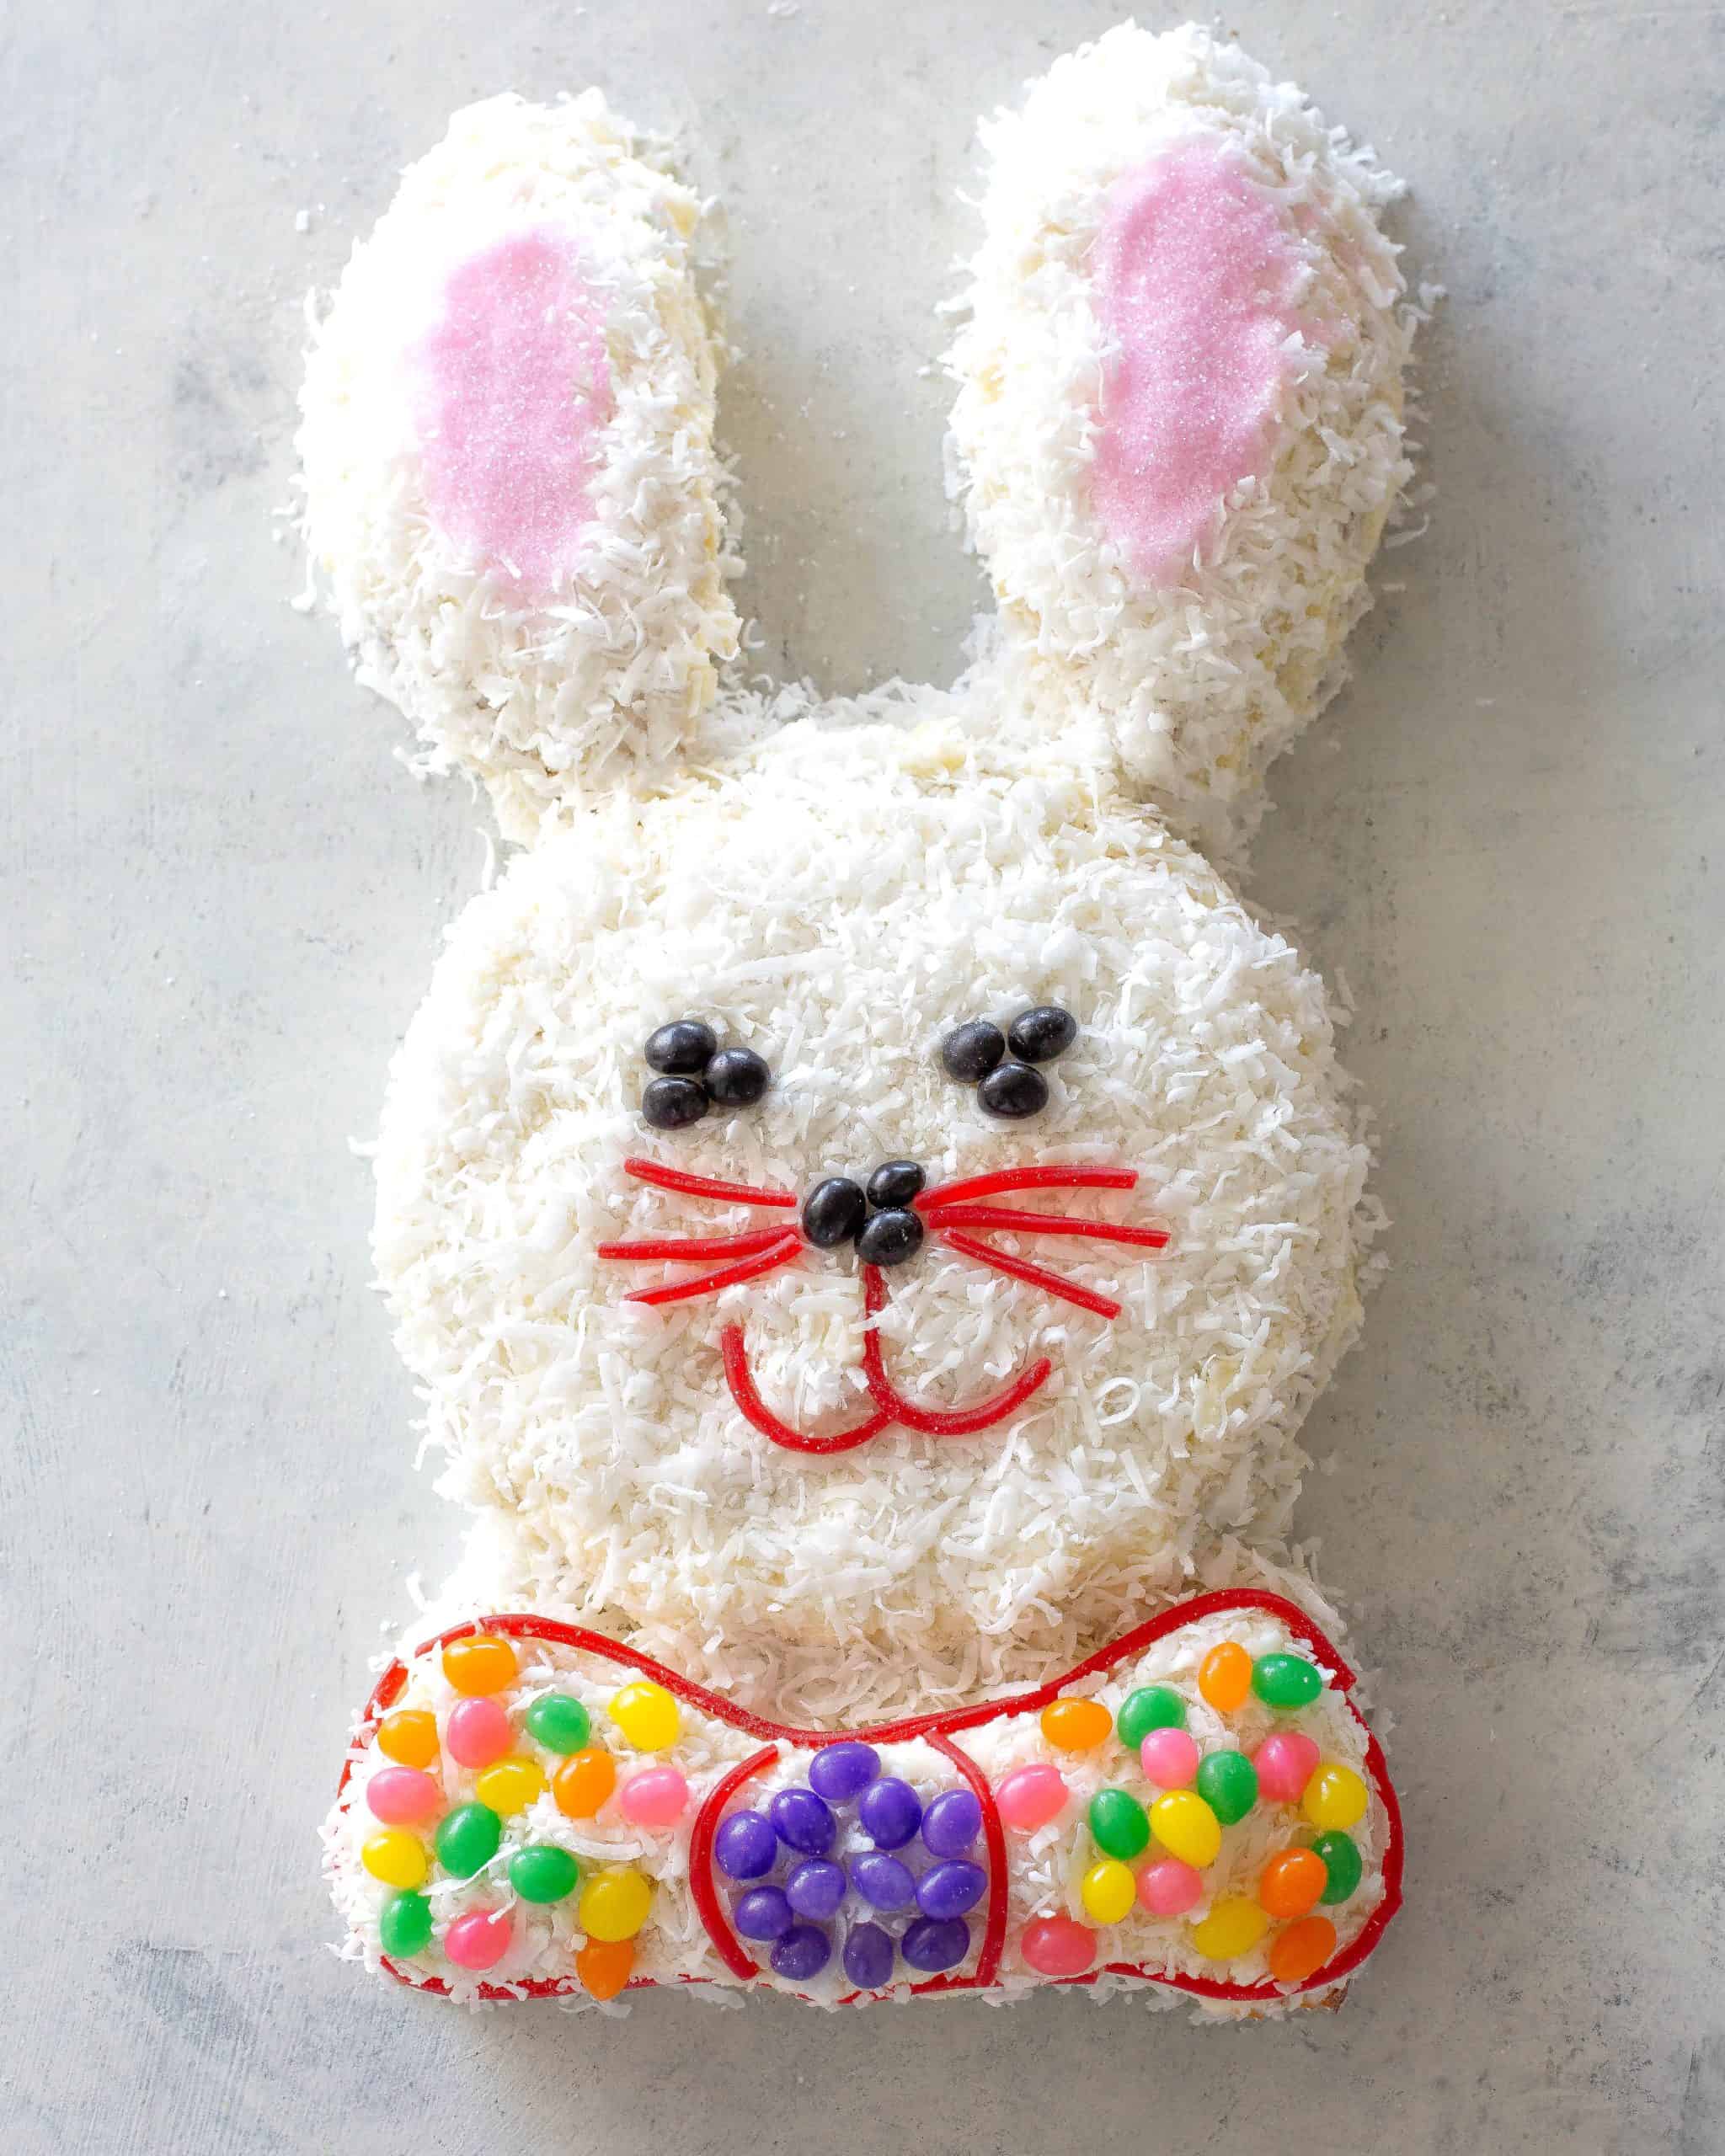 Easter Bunny Cake Recipe - The Girl Who Ate Everything